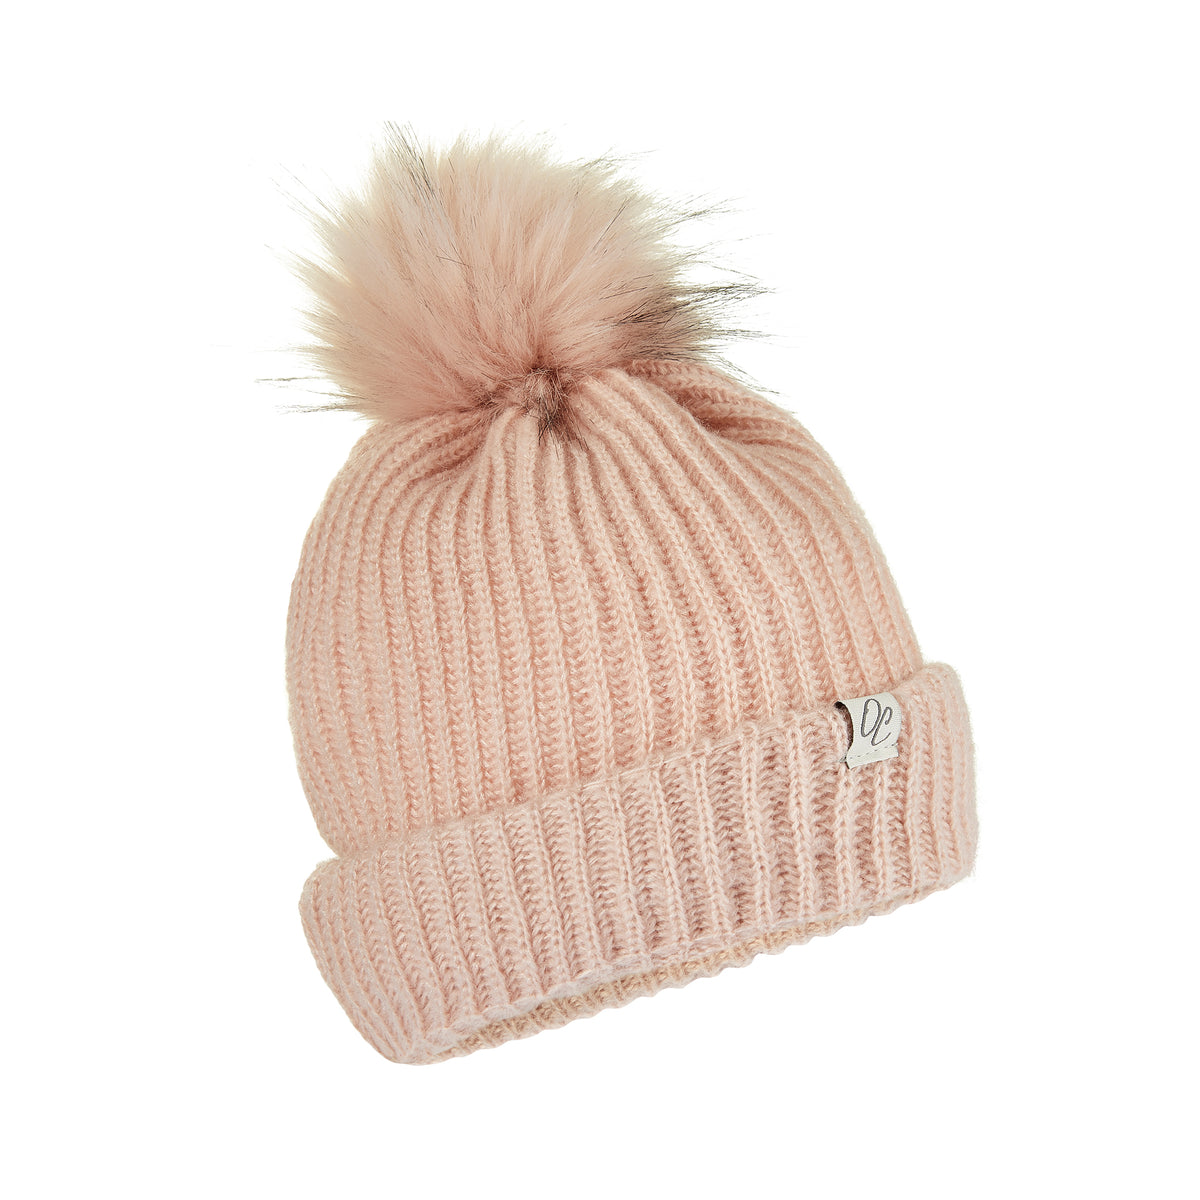 Only Curls Satin Lined Pink Knitted Beanie Hat with pom pom flatlay